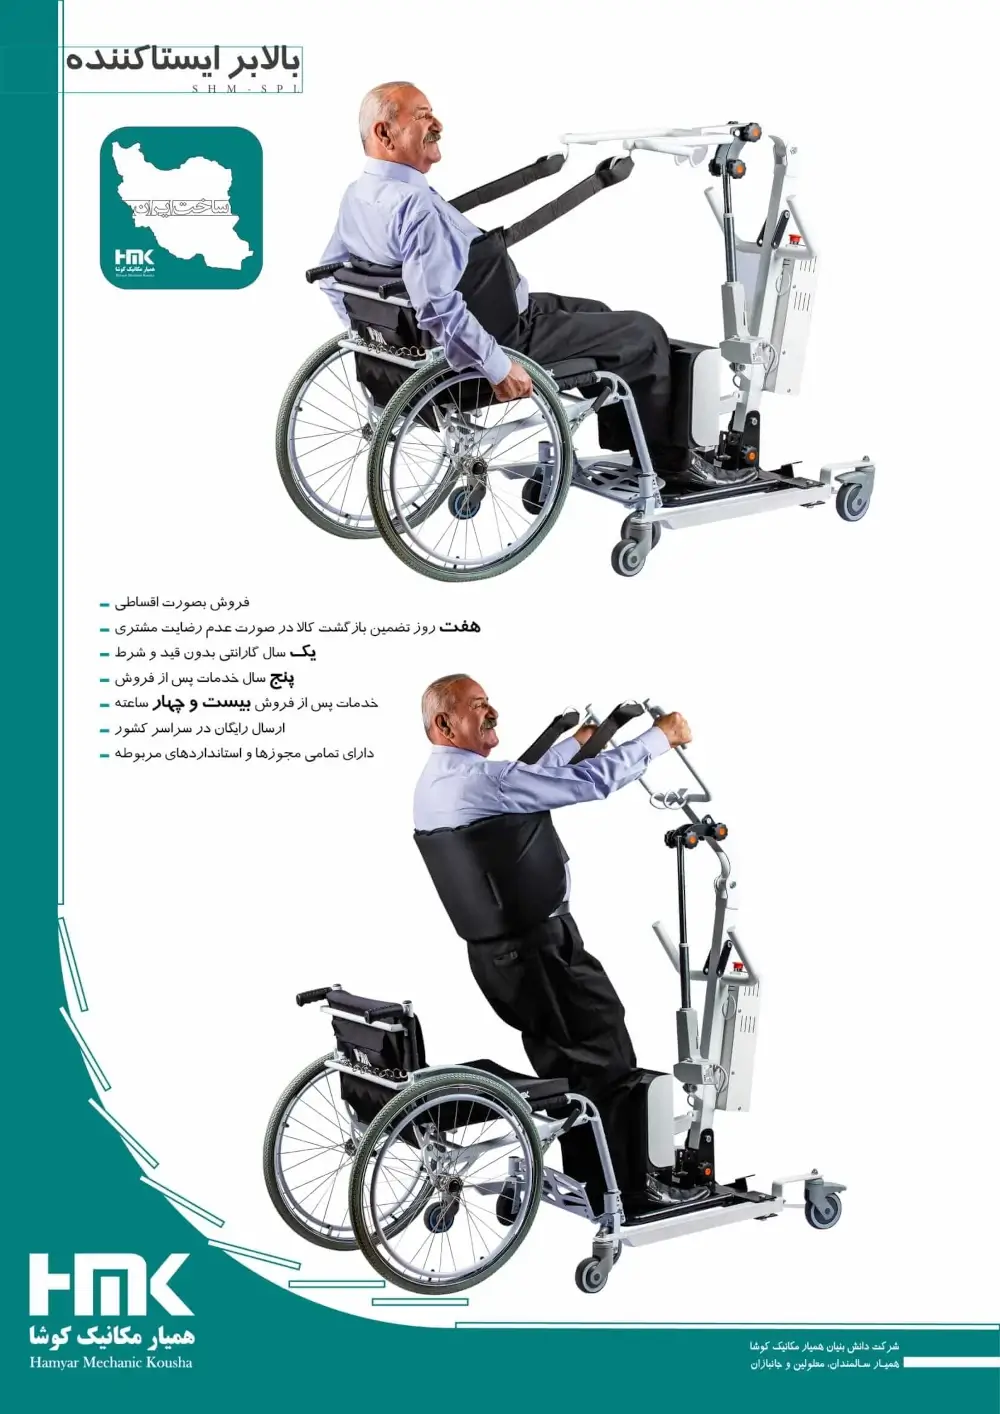 catalog The price and purchase of a stationary lift, easy to move and transfer the patient